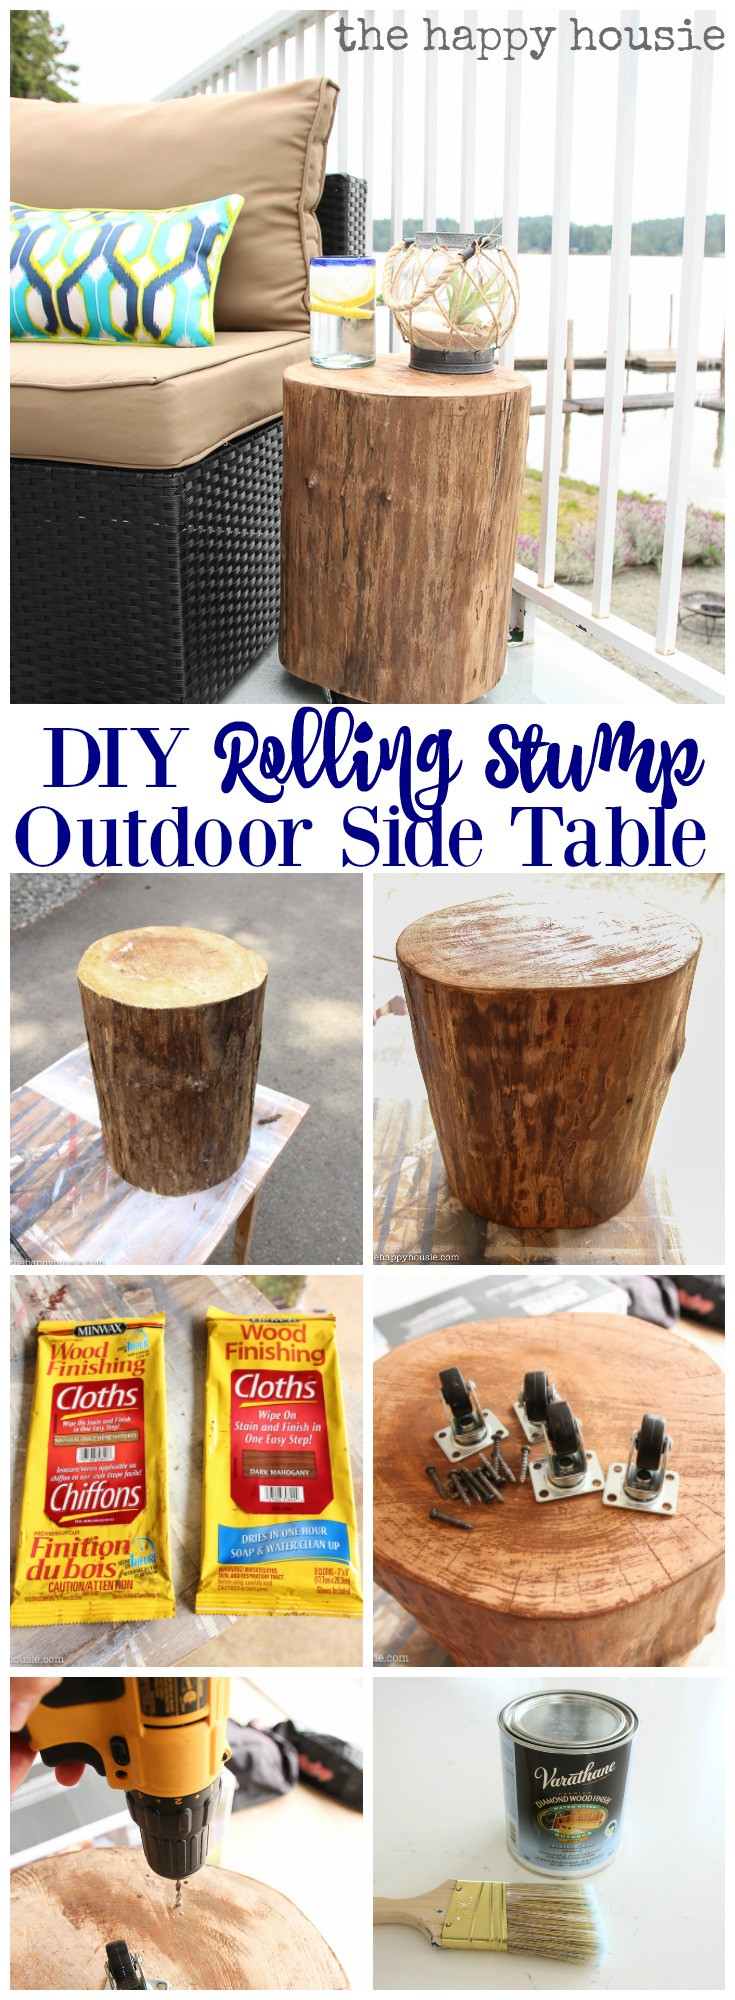 DIY Outdoor Side Table
 DIY Outdoor Rolling Stump Side Table